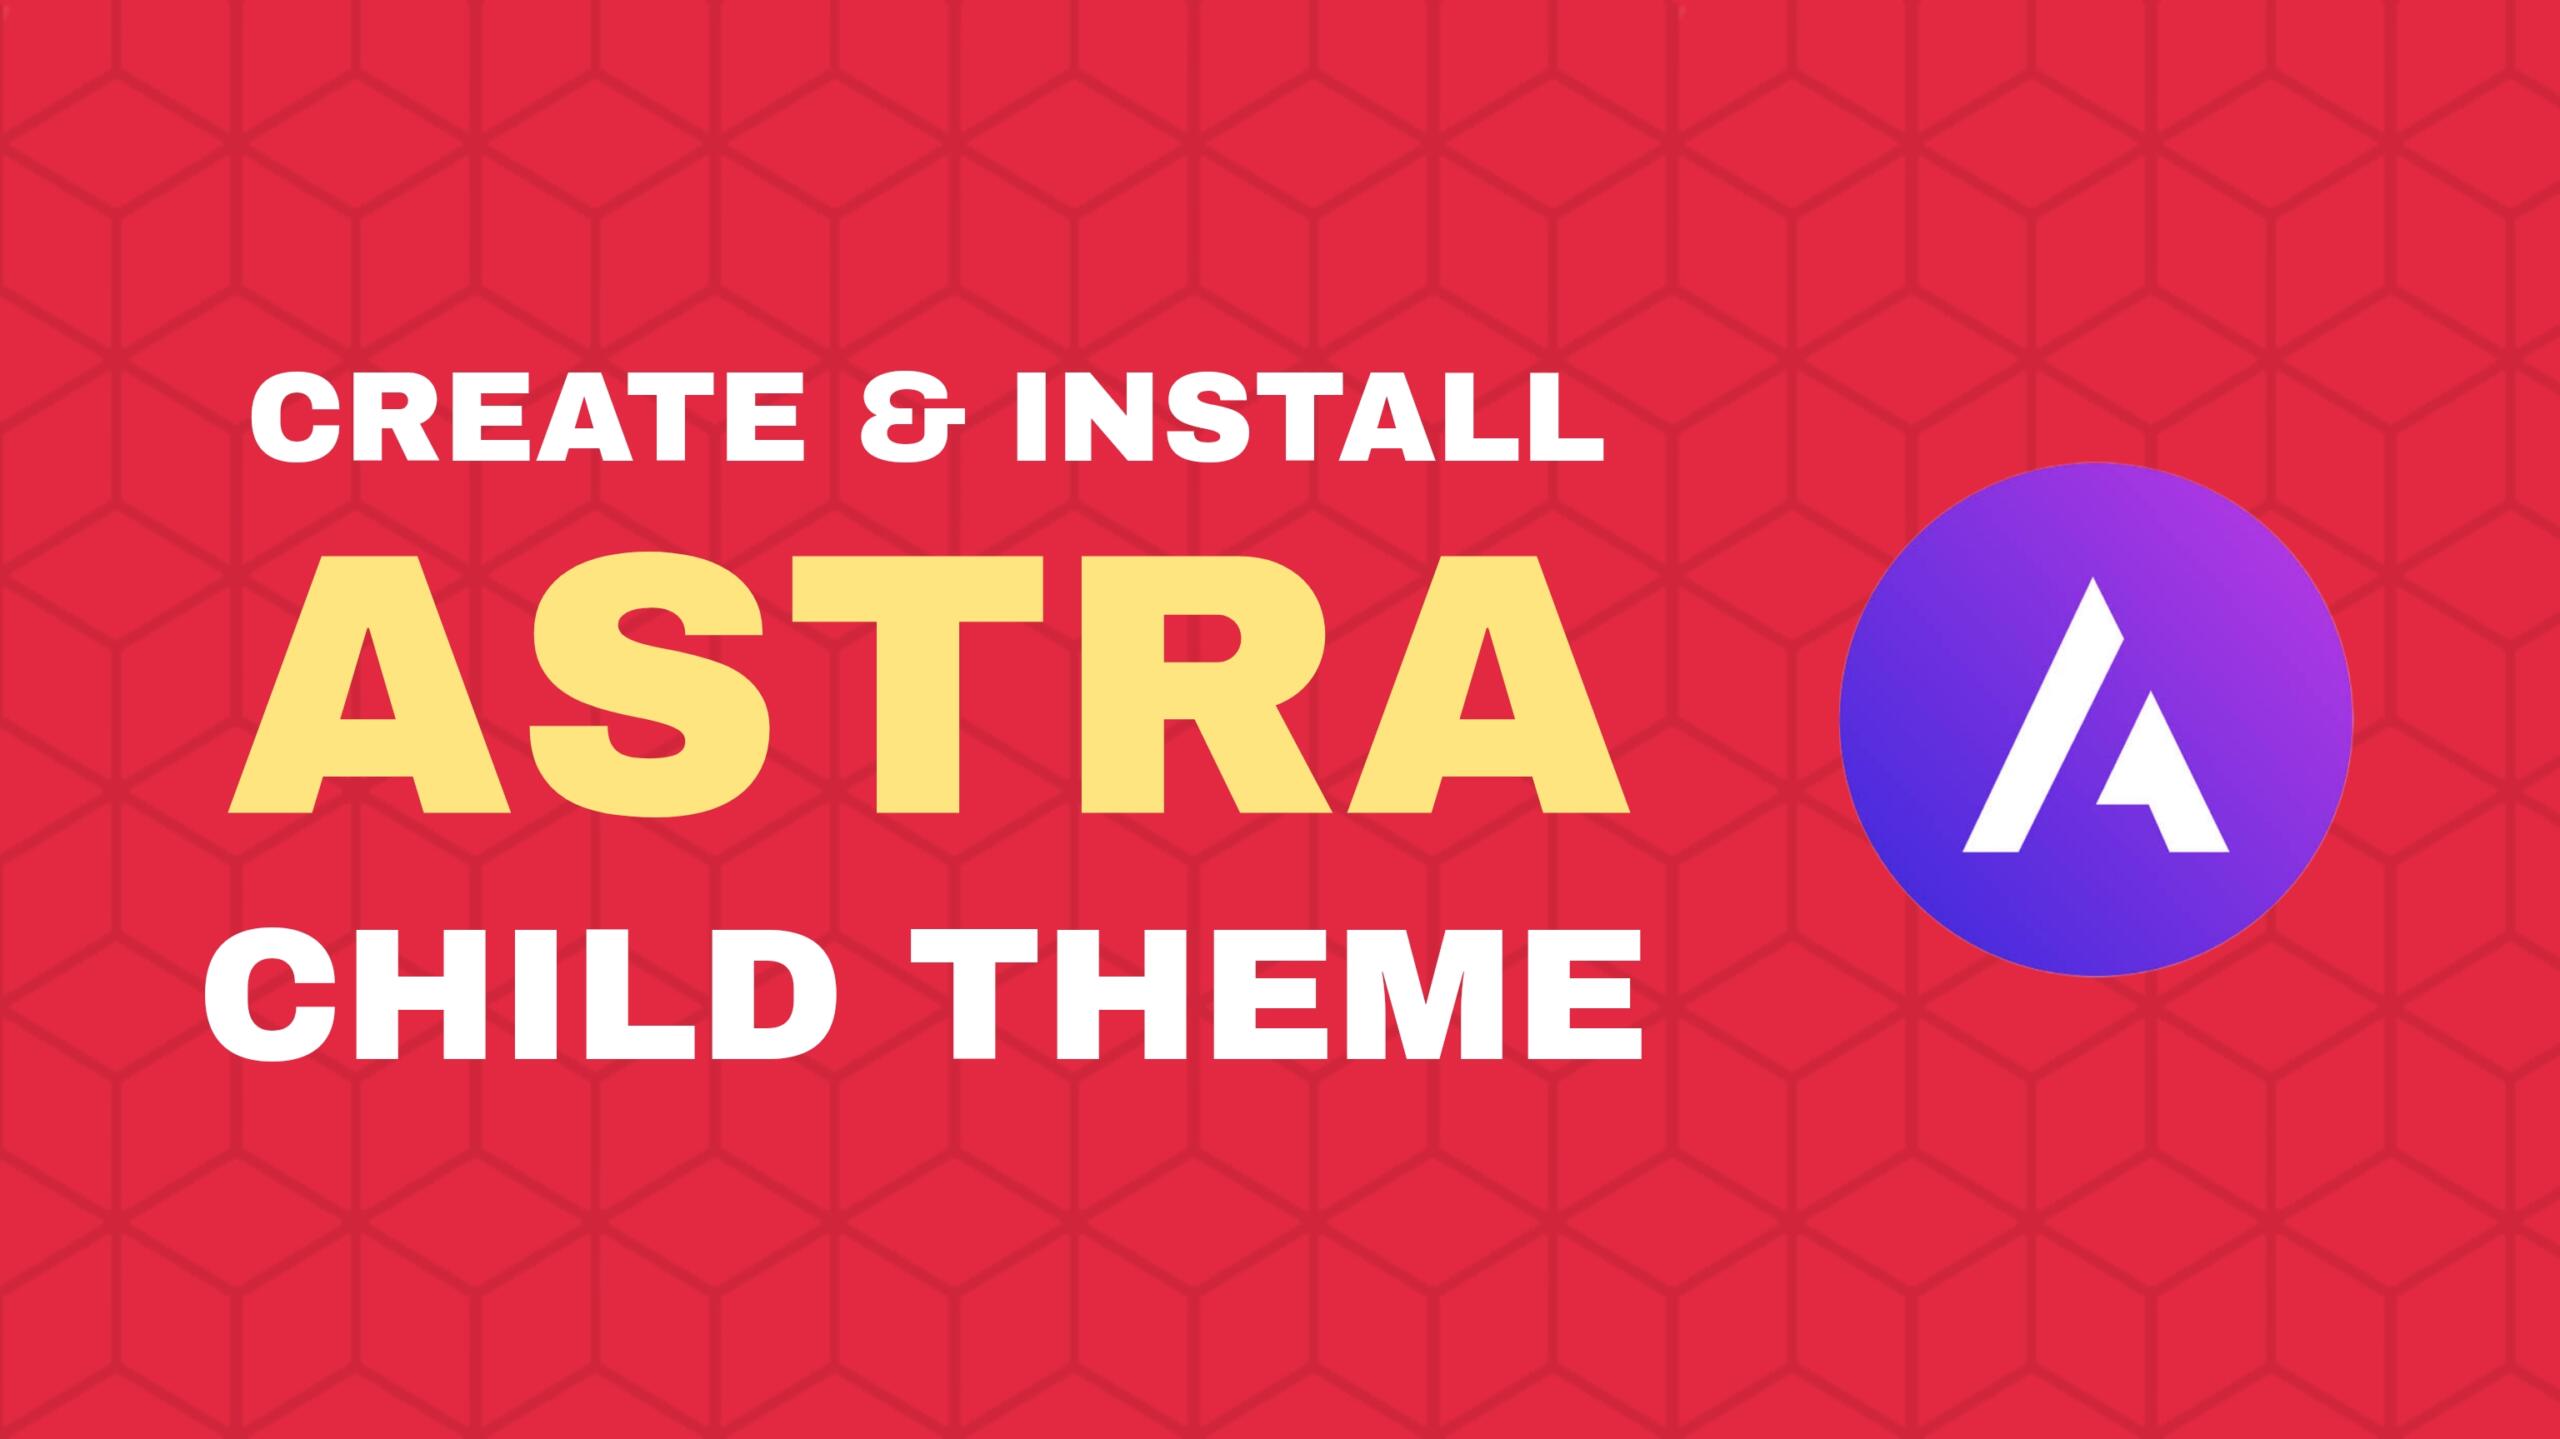 How to create Astra child theme and install in WordPress?